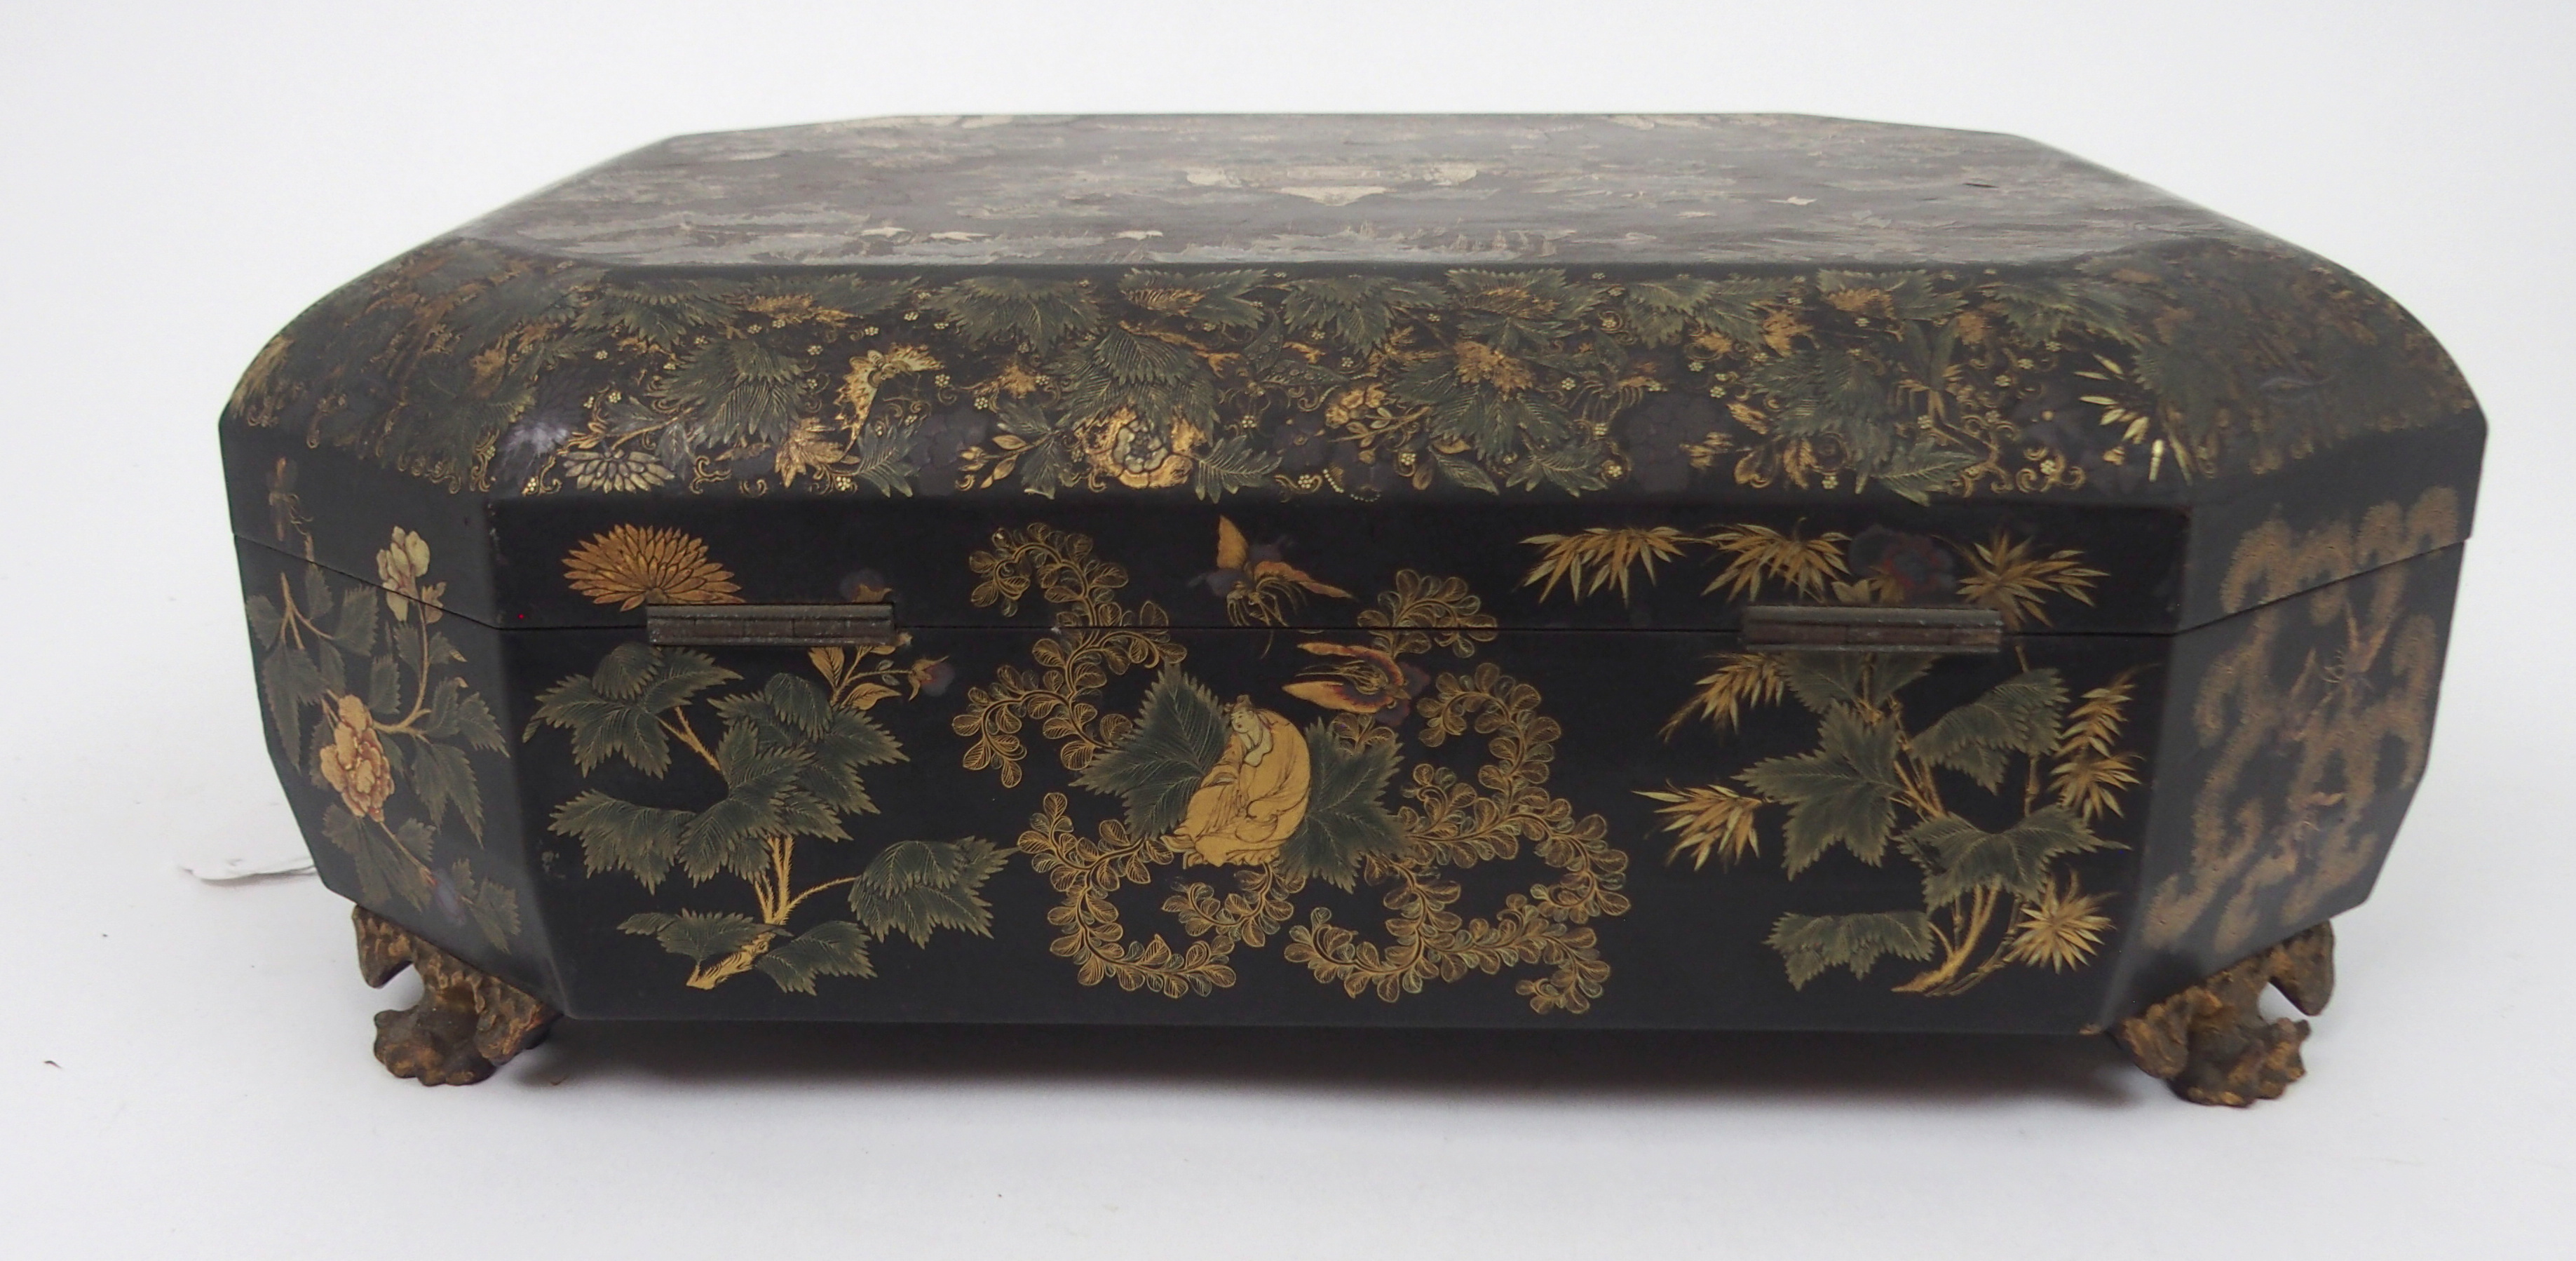 A CANTONESE BLACK AND GOLD LAQUERED SEWING BOX painted in gilts with immortals and figures beneath - Image 8 of 10